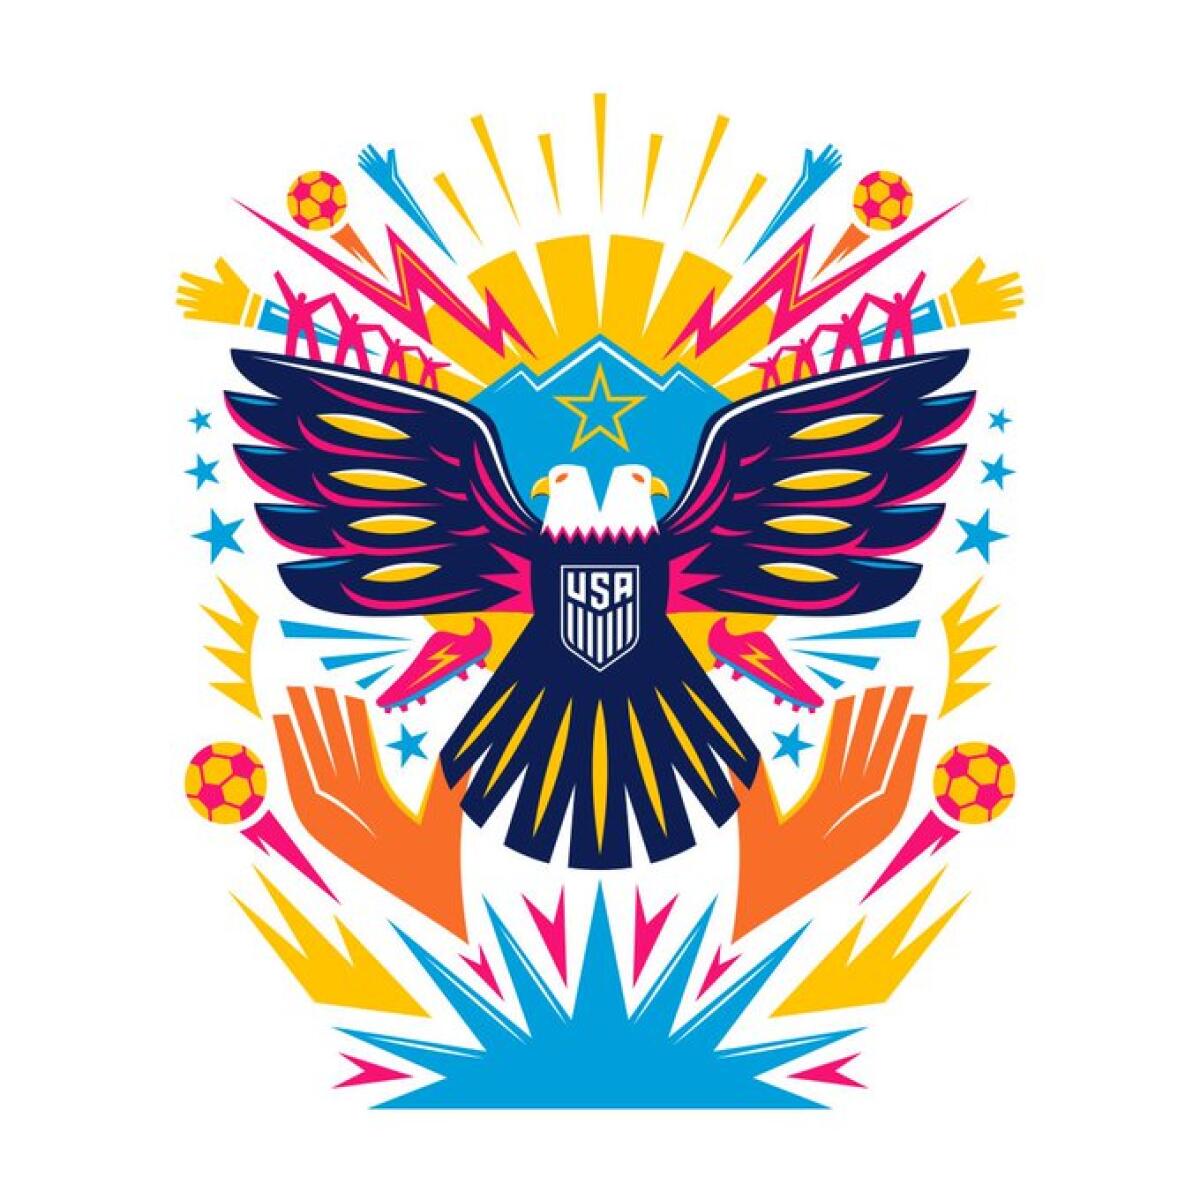 A bright graphic shows a double headed eagle framed by hands, soccer balls and cheering fans.